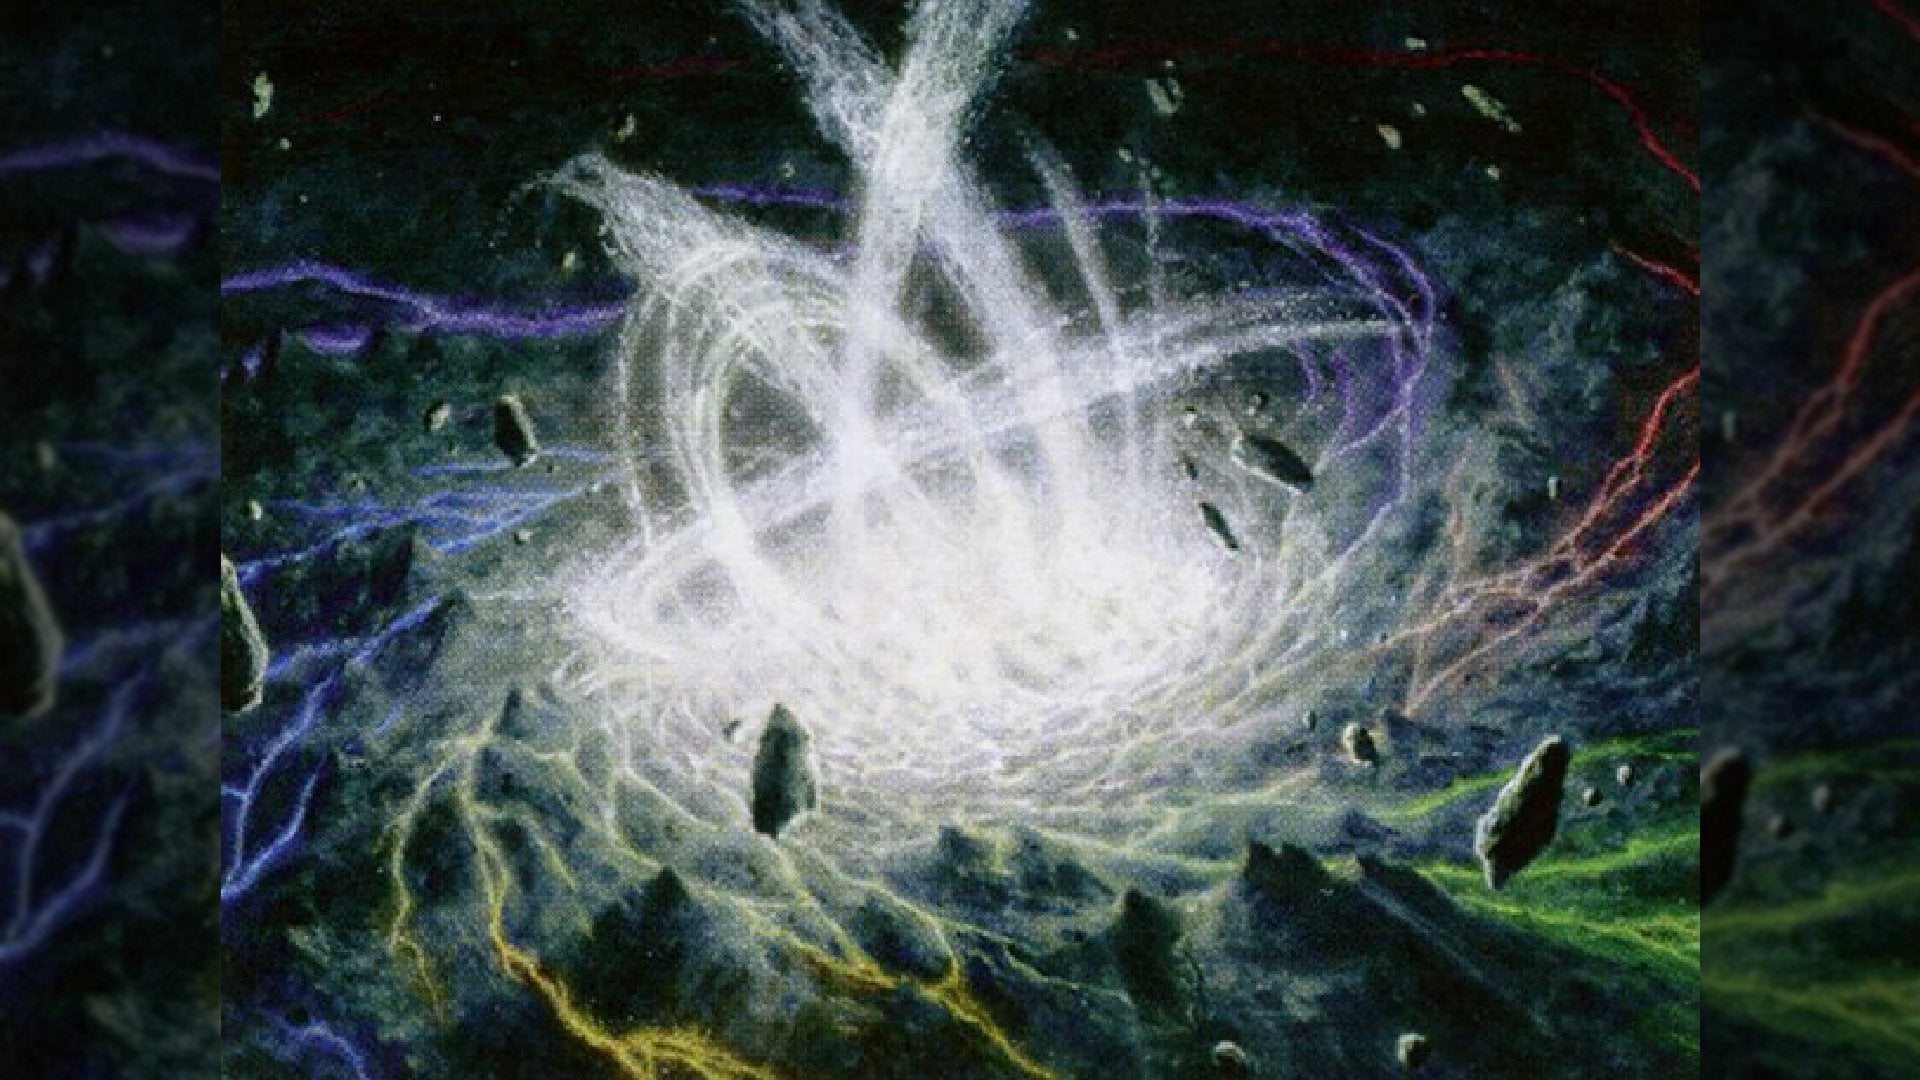 Artwork from the MTG card "Maelstrom Nexus" which depicts a swirling vortex of energy.